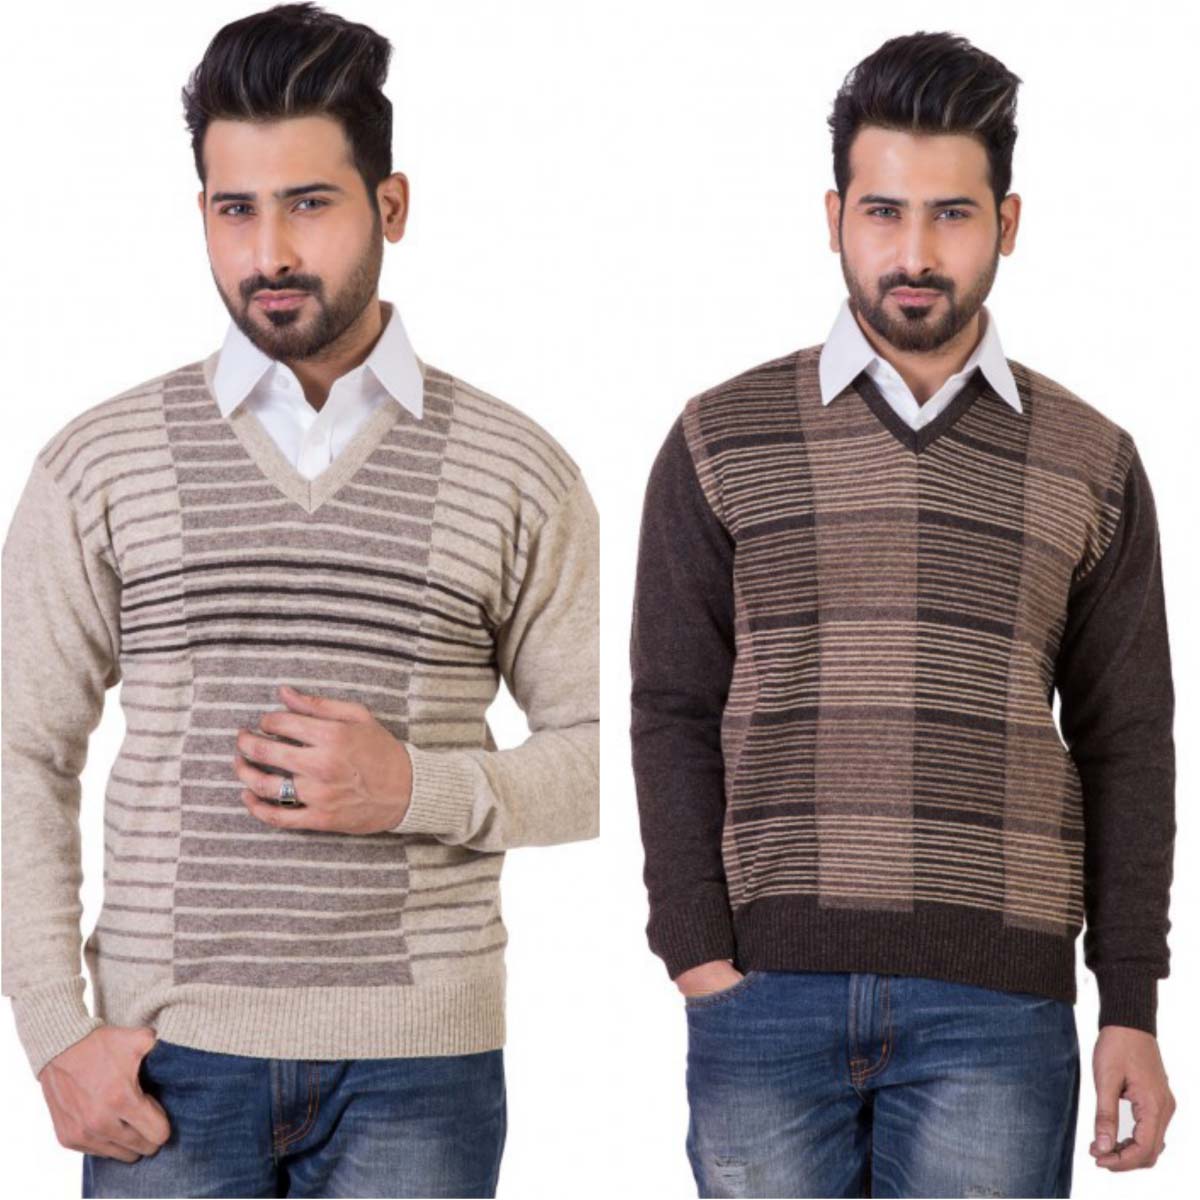 bonanza-winter-sweaters-and-outfits-2017-2018-for-men-7